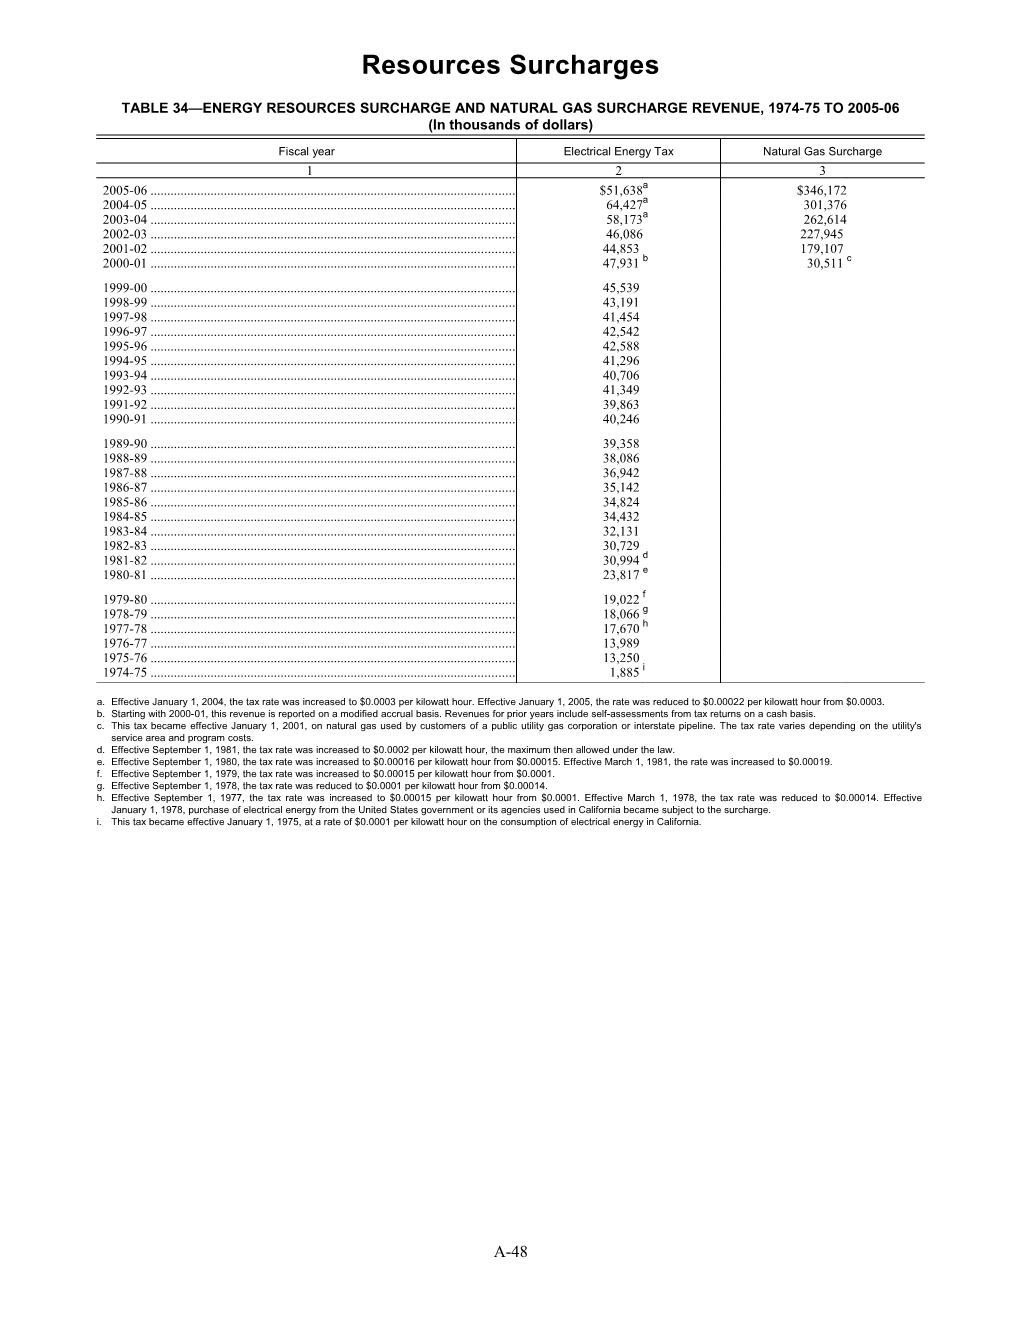 Table 34 Energy Resources Surcharge and Natural Gas Surcharge Revenue, 1974-75 to 2005-06